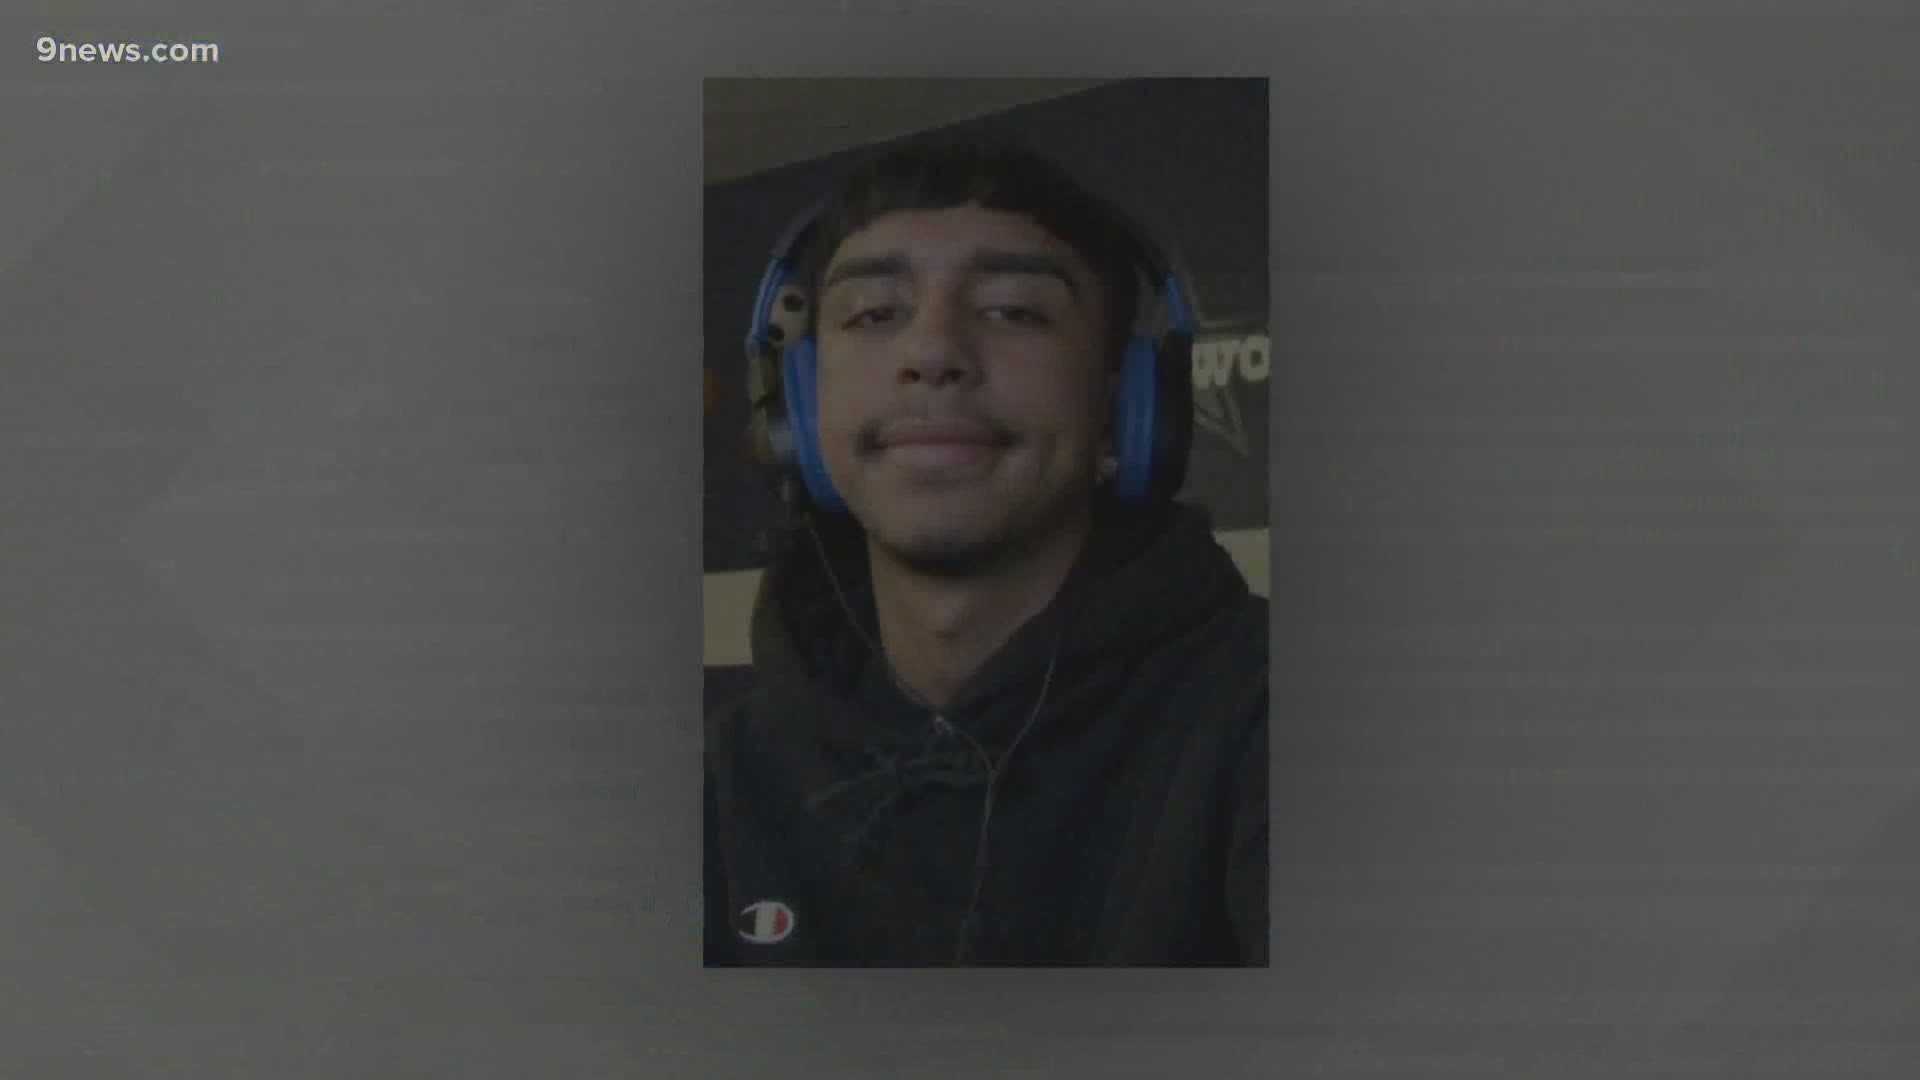 Alexis Mendez-Perez, 16, was among a group accused of breaking into a vacant house. A department of corrections officer shot him in the back as he fled.